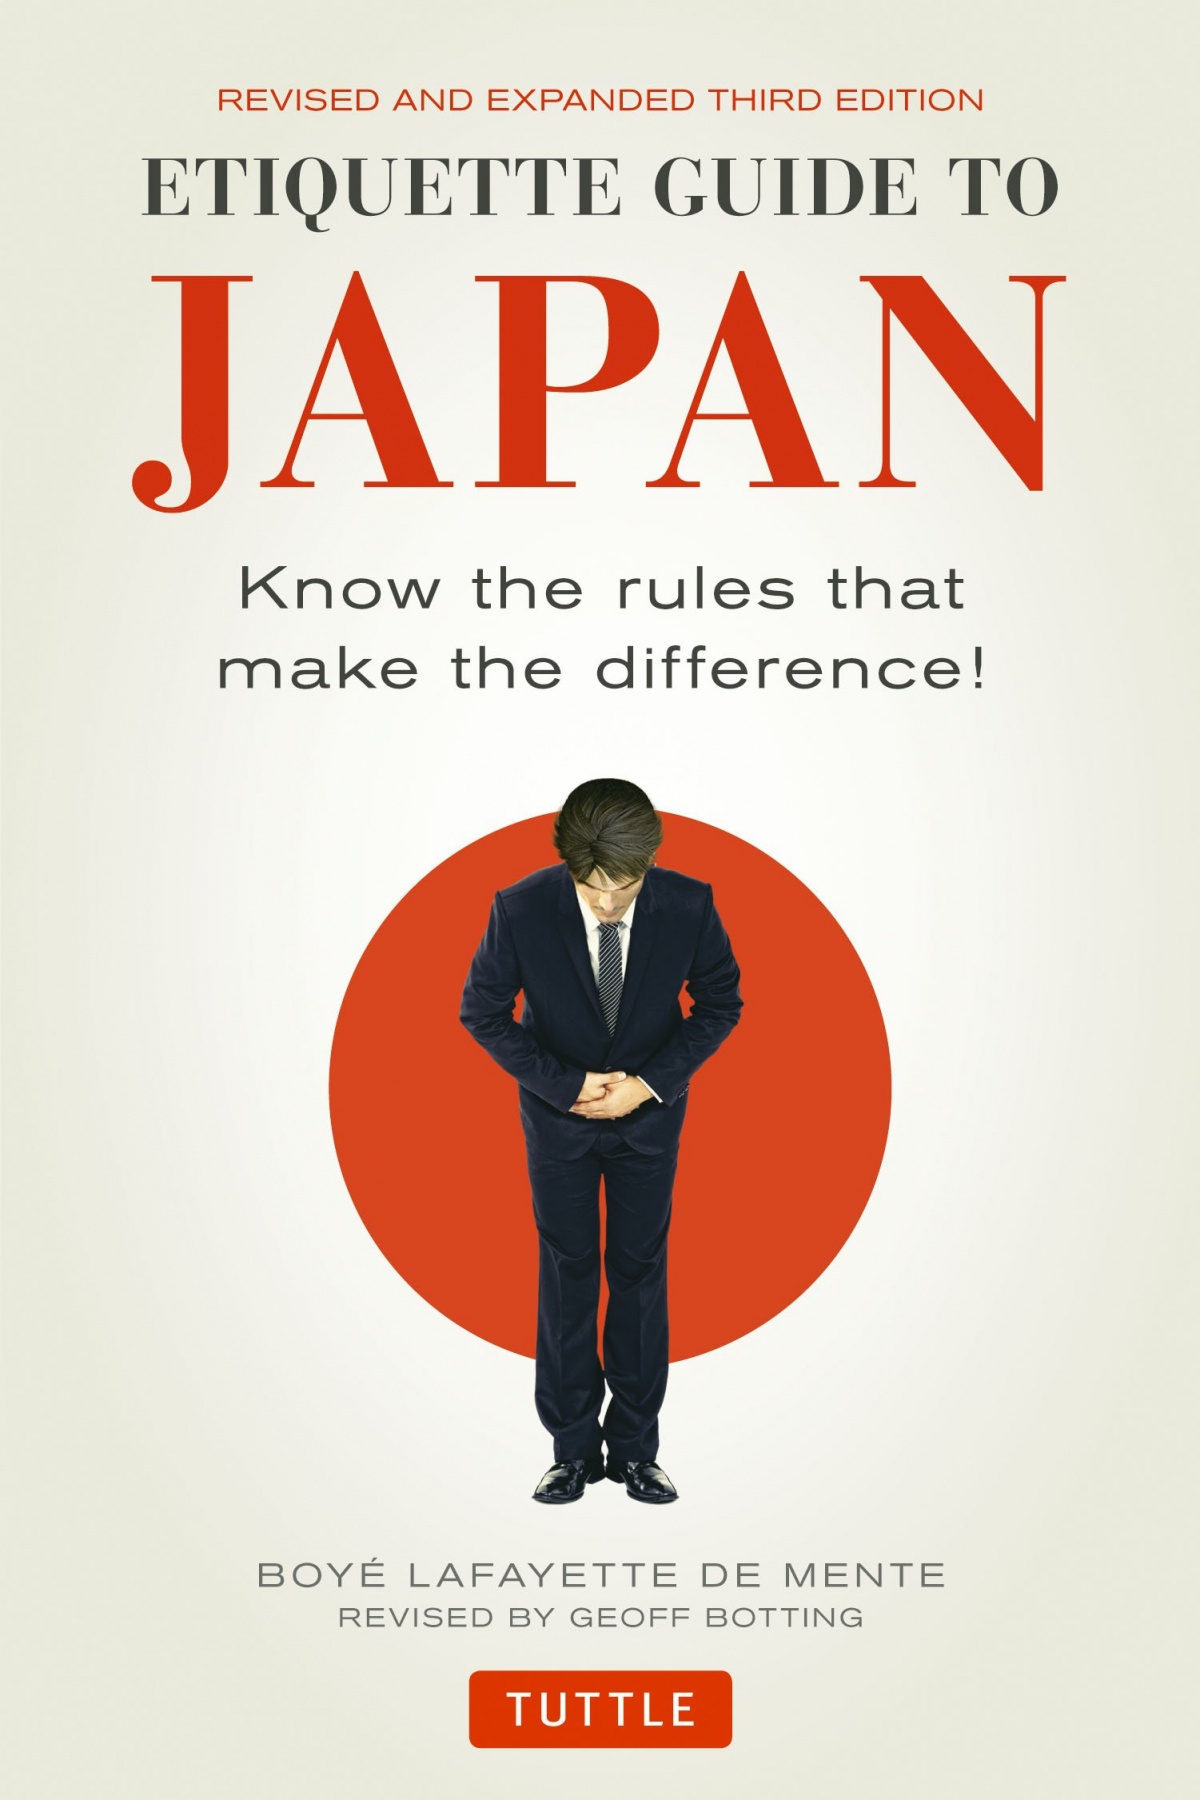 Etiquette Guide to Japan: Know the Rules that Make the Difference! by Boye Lafayette De Mente